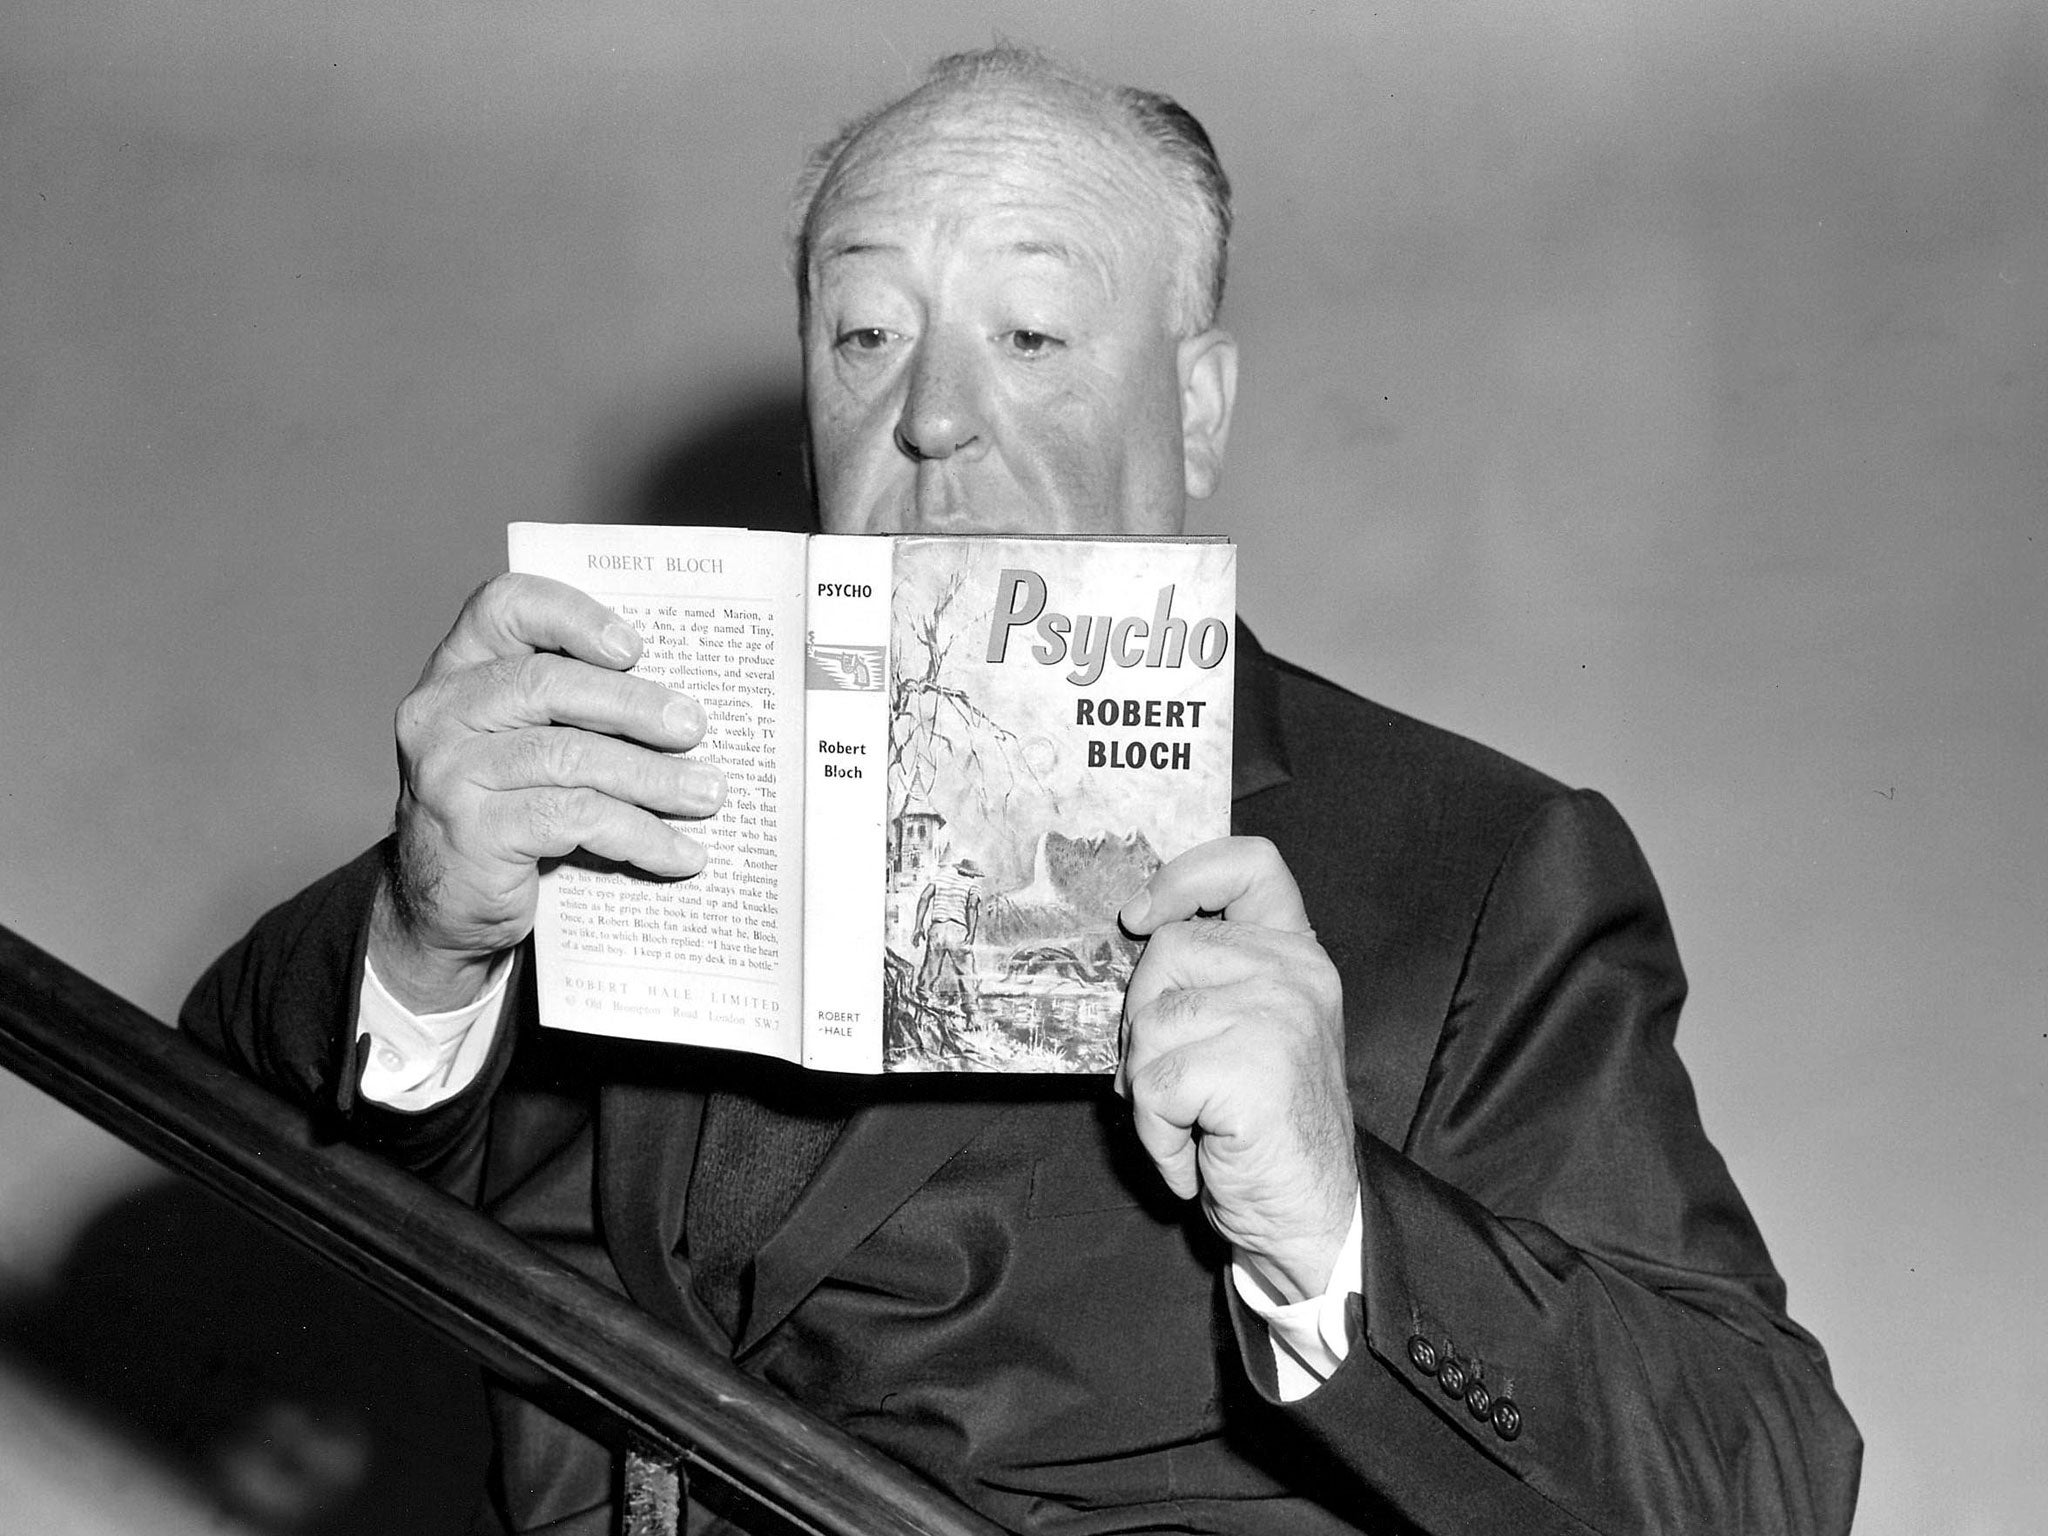 Source material: Alfred Hitchcock reading Robert Bloch's book